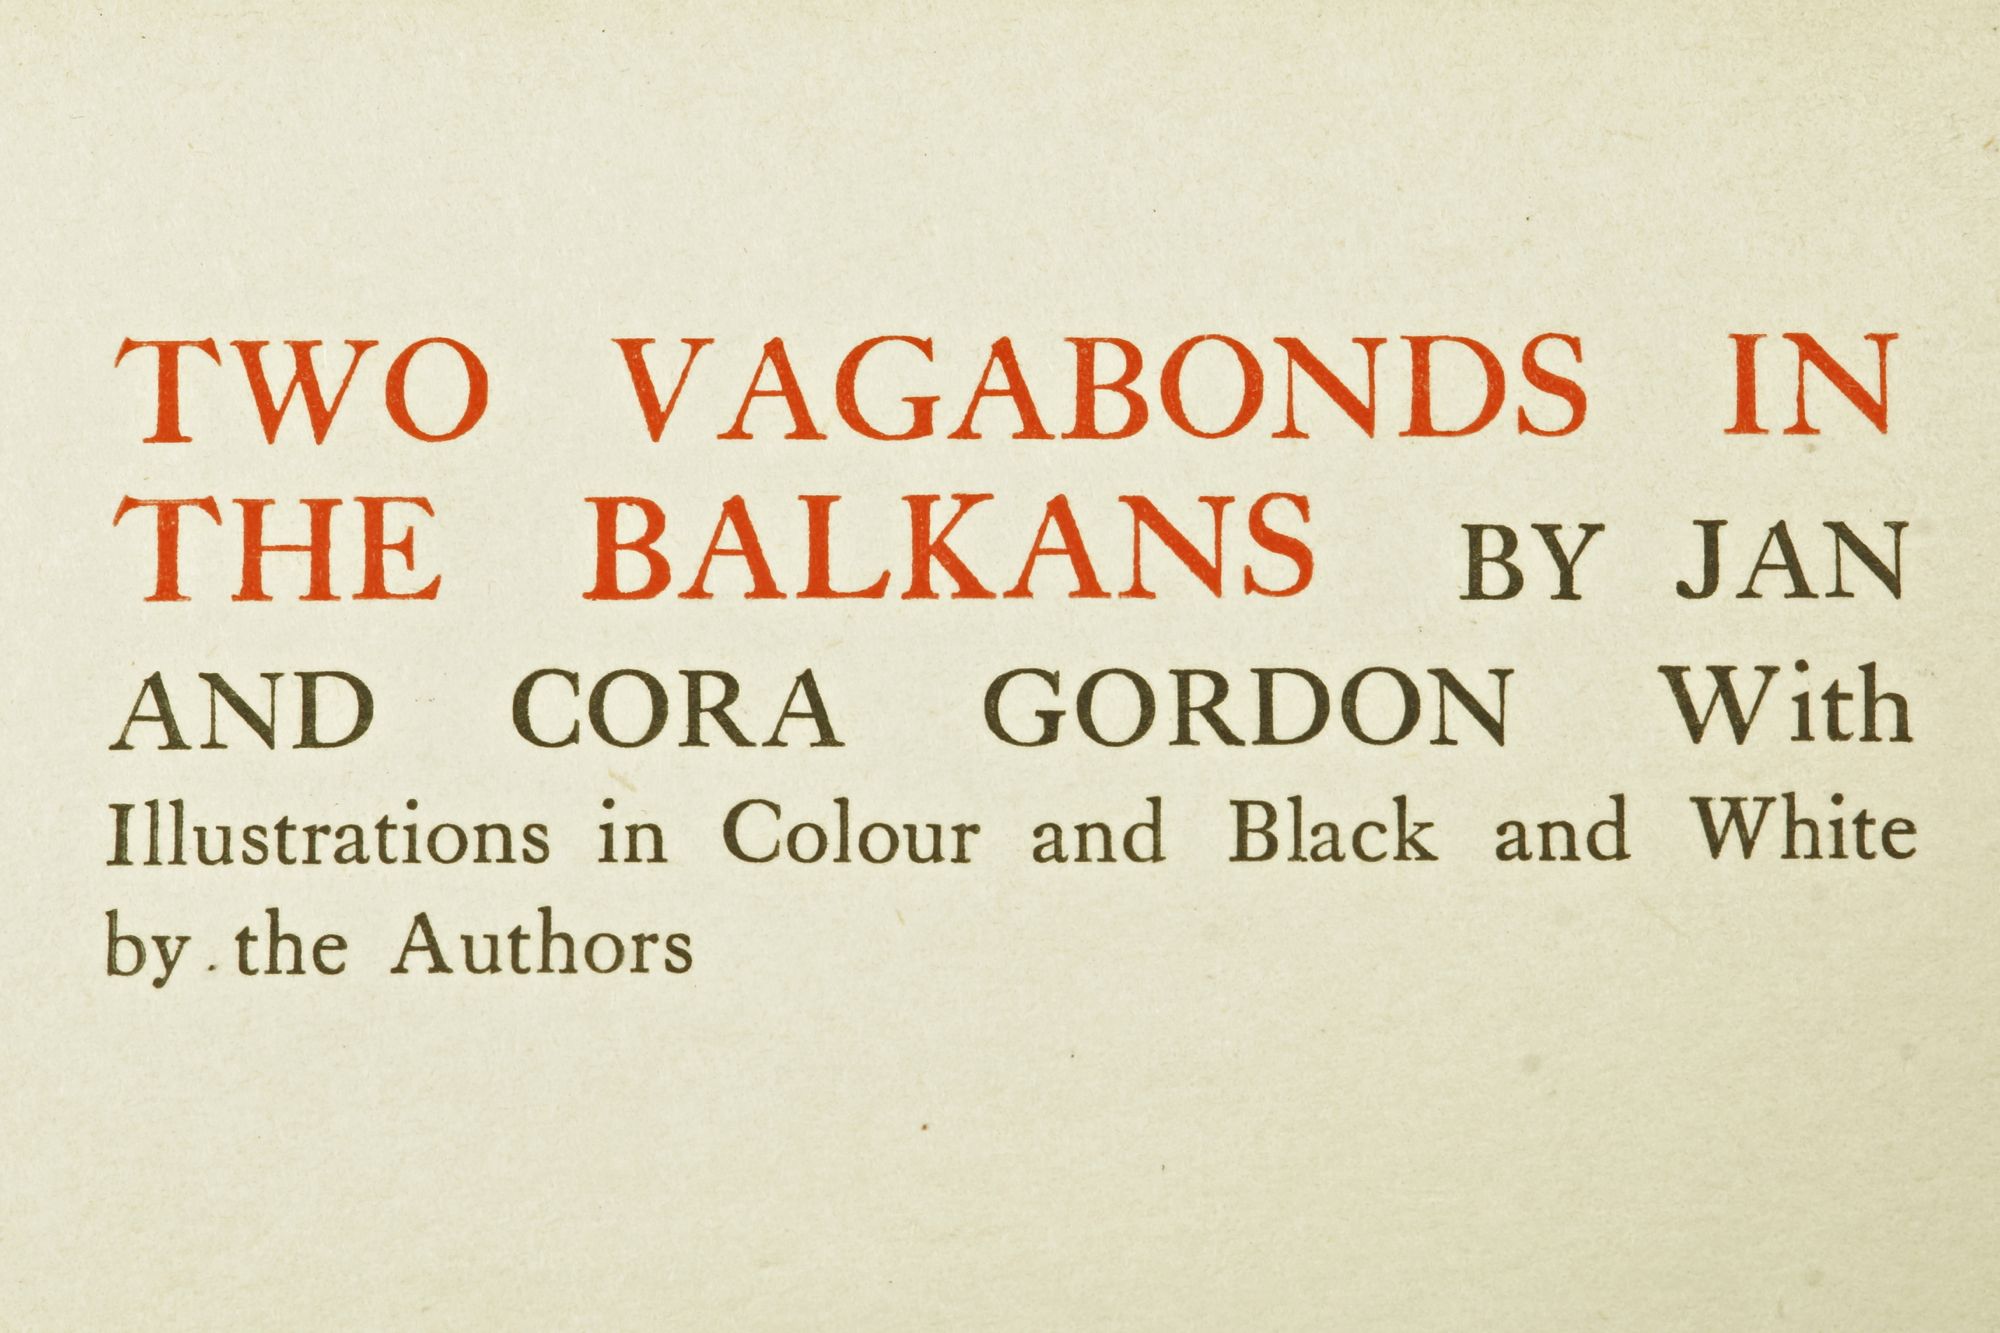 Continuing the illustrated travelogue tradition begun with the accounts of the two Spanish journeys, this was published in 1925.